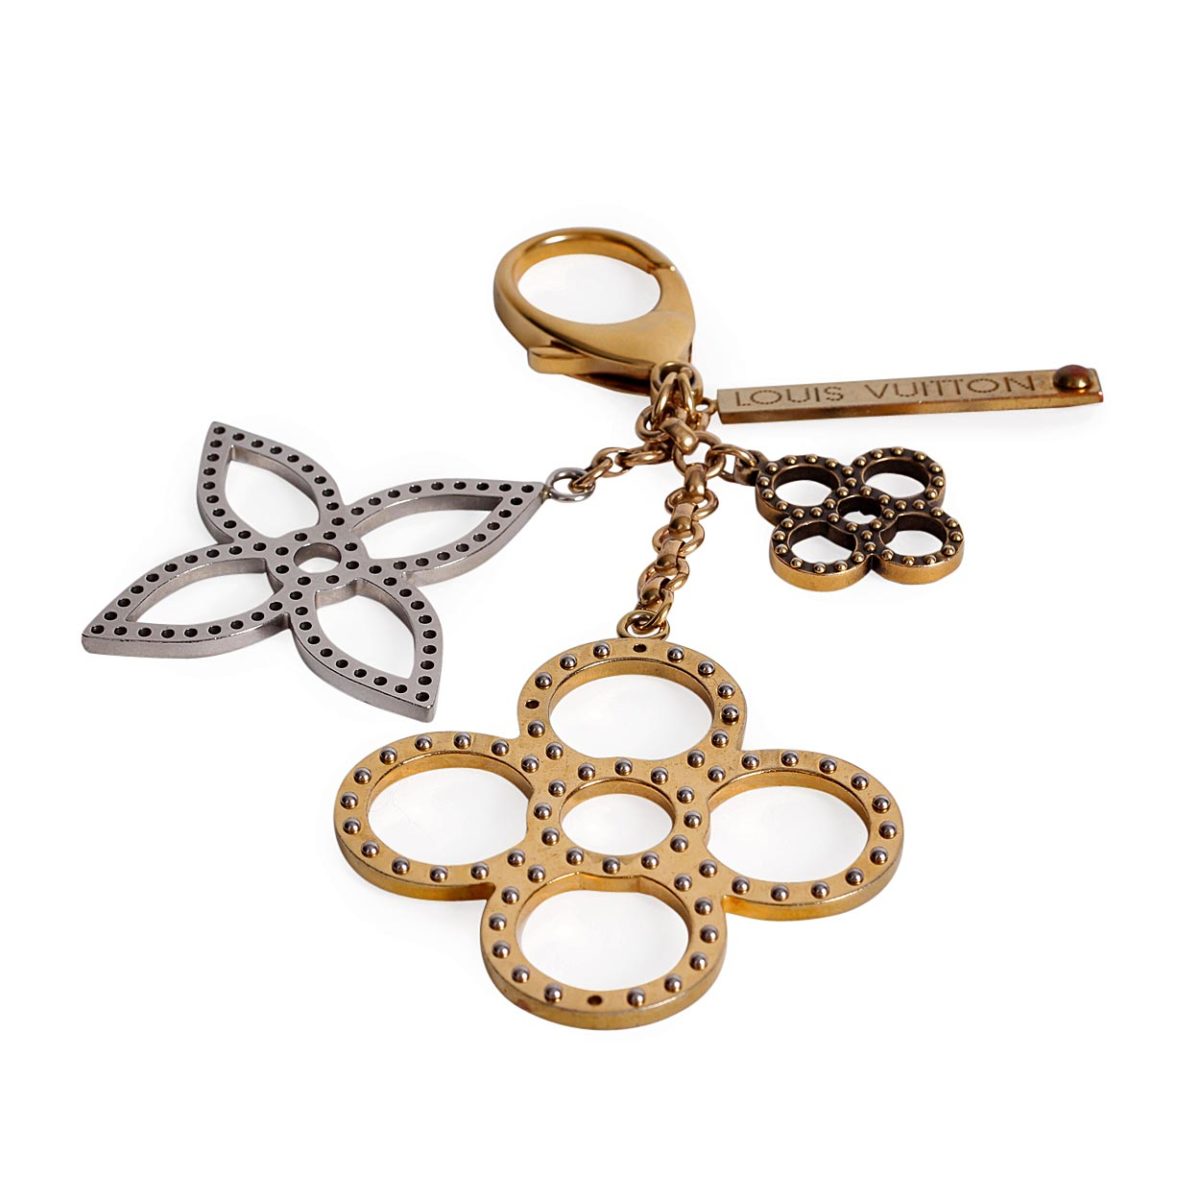 Louis Vuitton - Authenticated Idylle Blossom Bag Charm - Metal Gold for Women, Very Good Condition